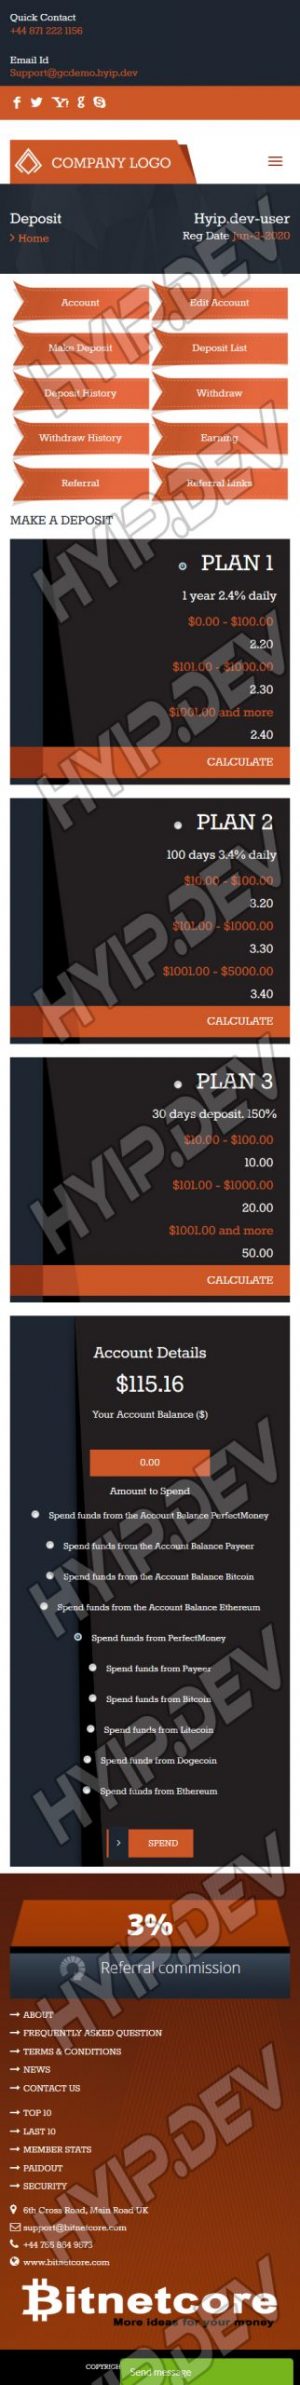 goldcoders hyip template no. 076, mobile page screenshot